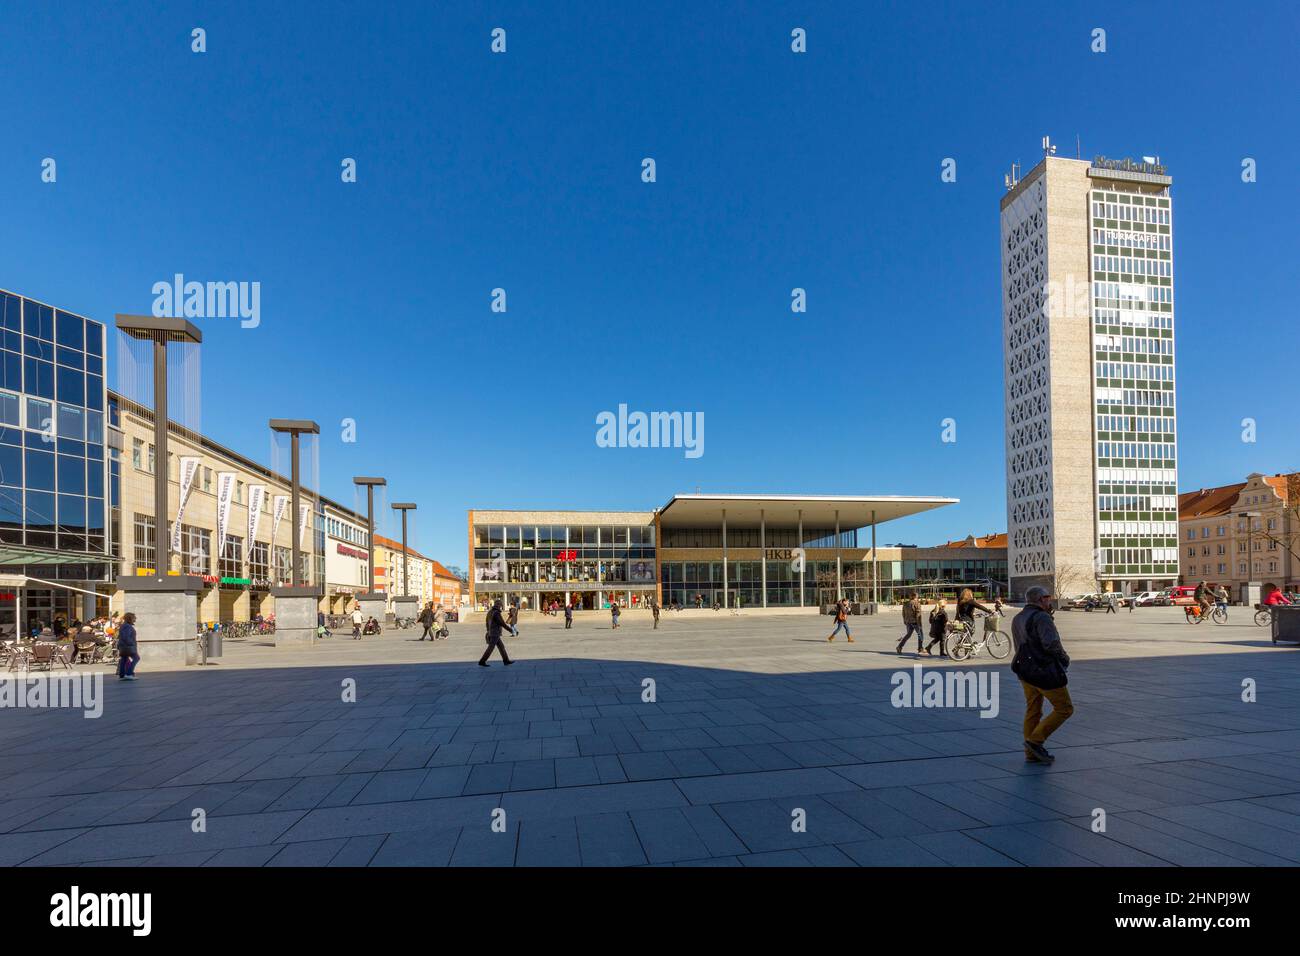 central market place with socialistic art buildings in Neubrandenburg, Germany. Stock Photo